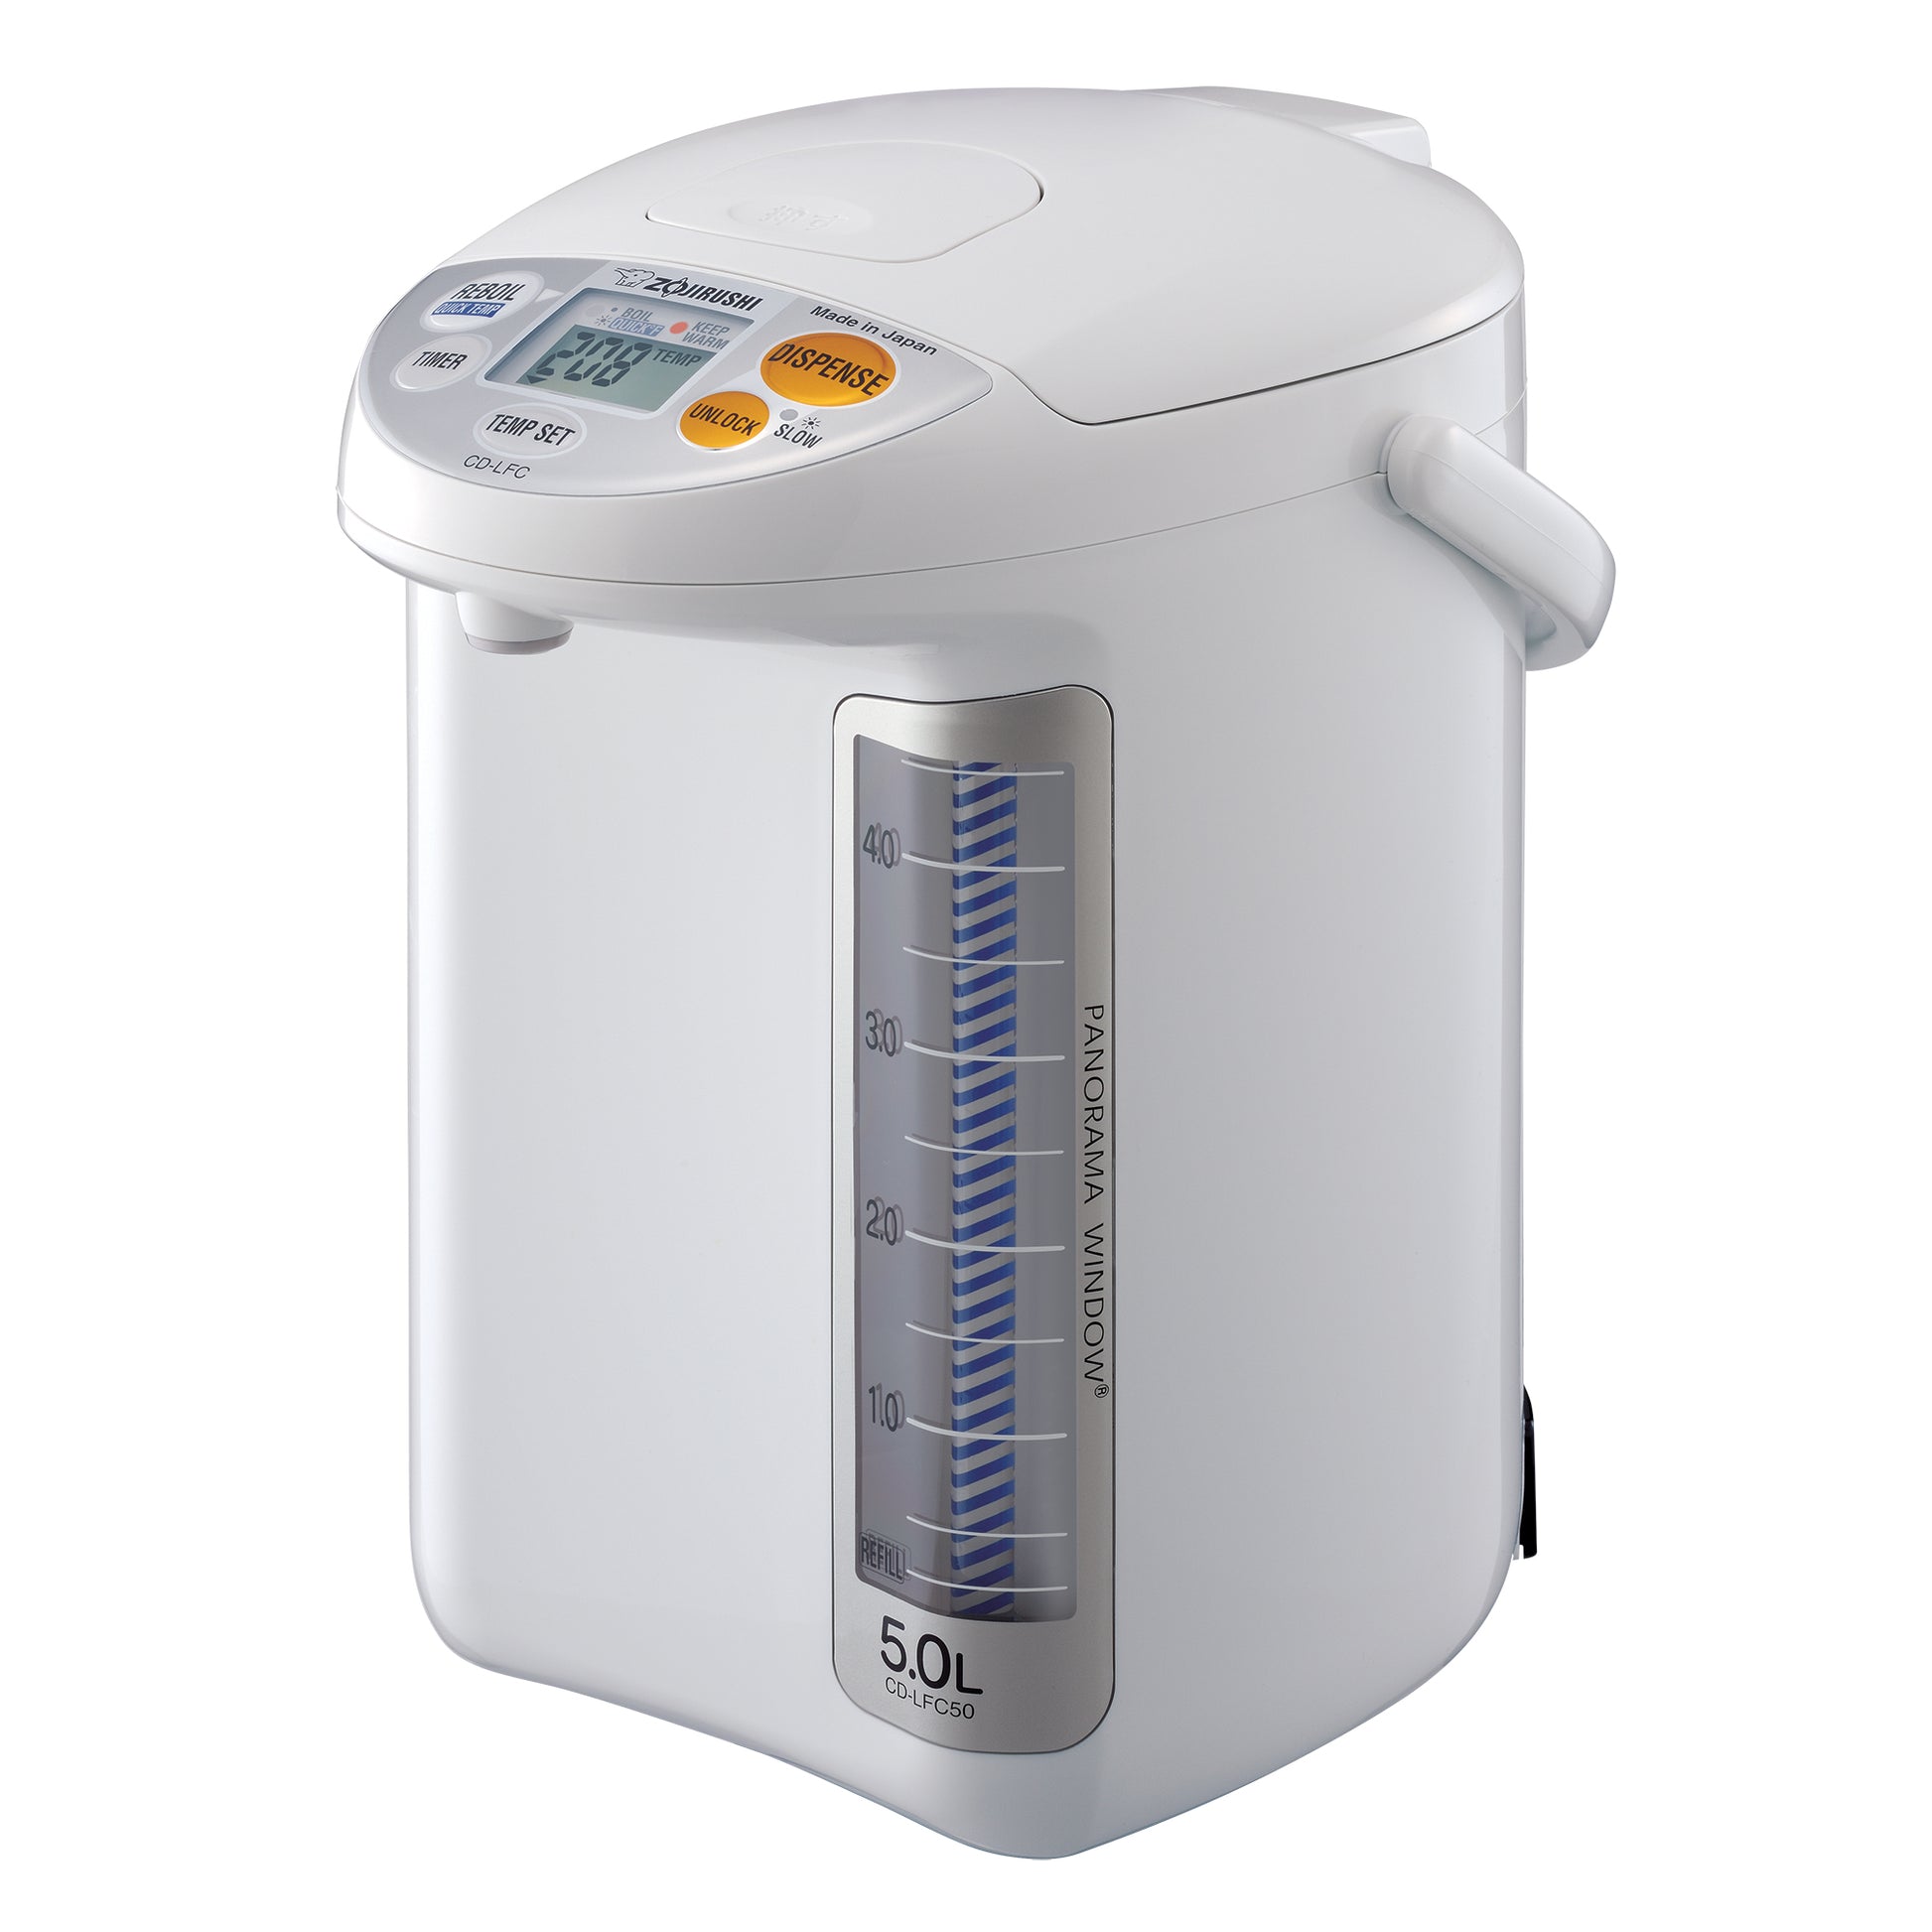 How to clean your Zojirushi Water Boiler & Warmer using Citric Acid Cleaner  CD-K03EJU  Our Citric Acid Cleaner for Electric Water Boilers (CD-K03EJU)  is great for keeping your water boiler in